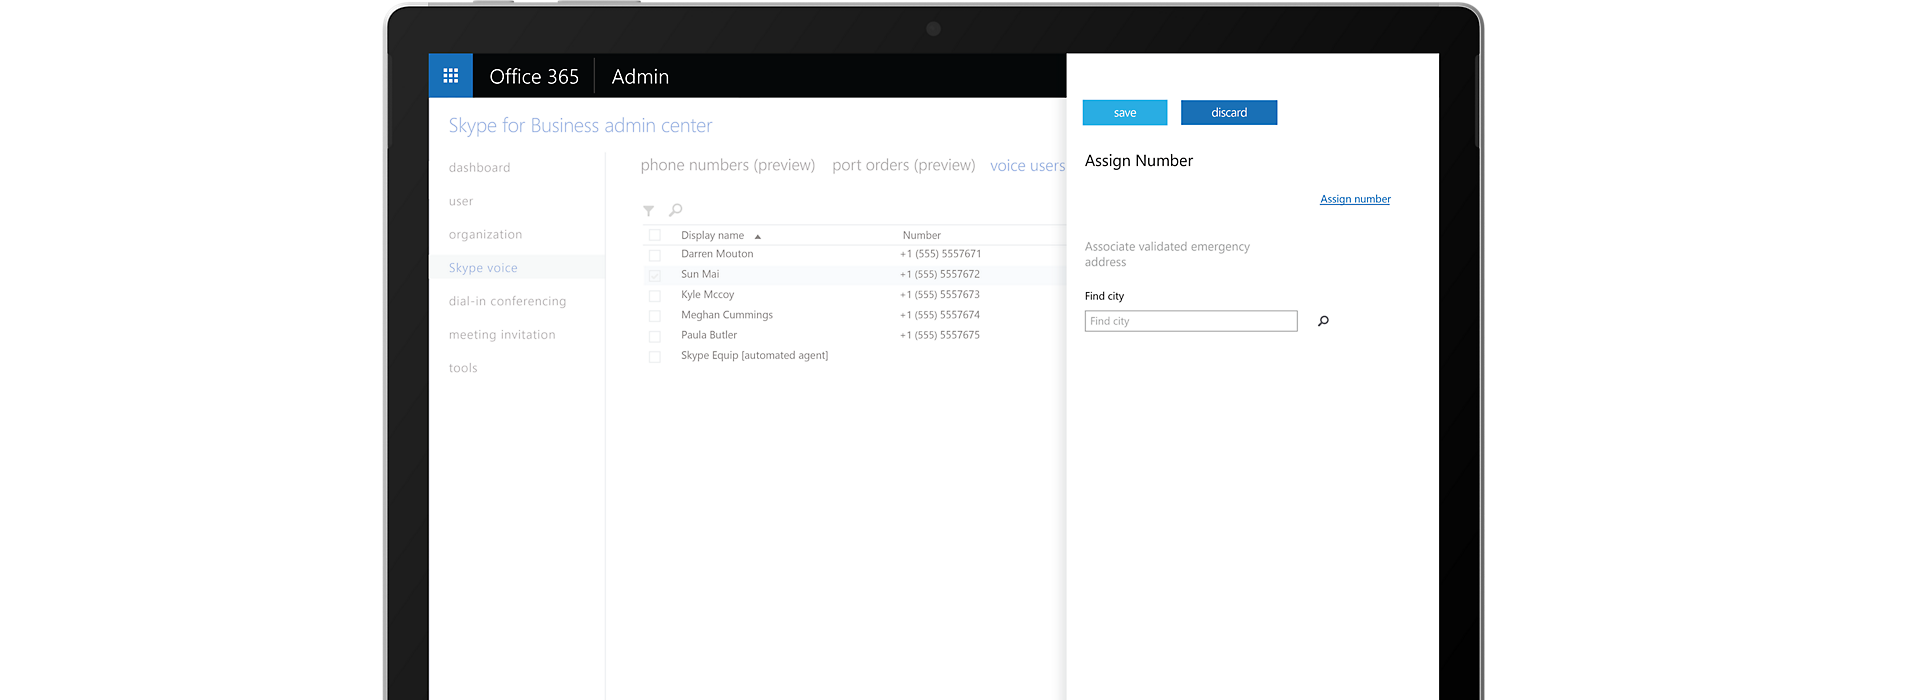 Device screen showing a user assigning a number to a contact in the Skype for Business admin center